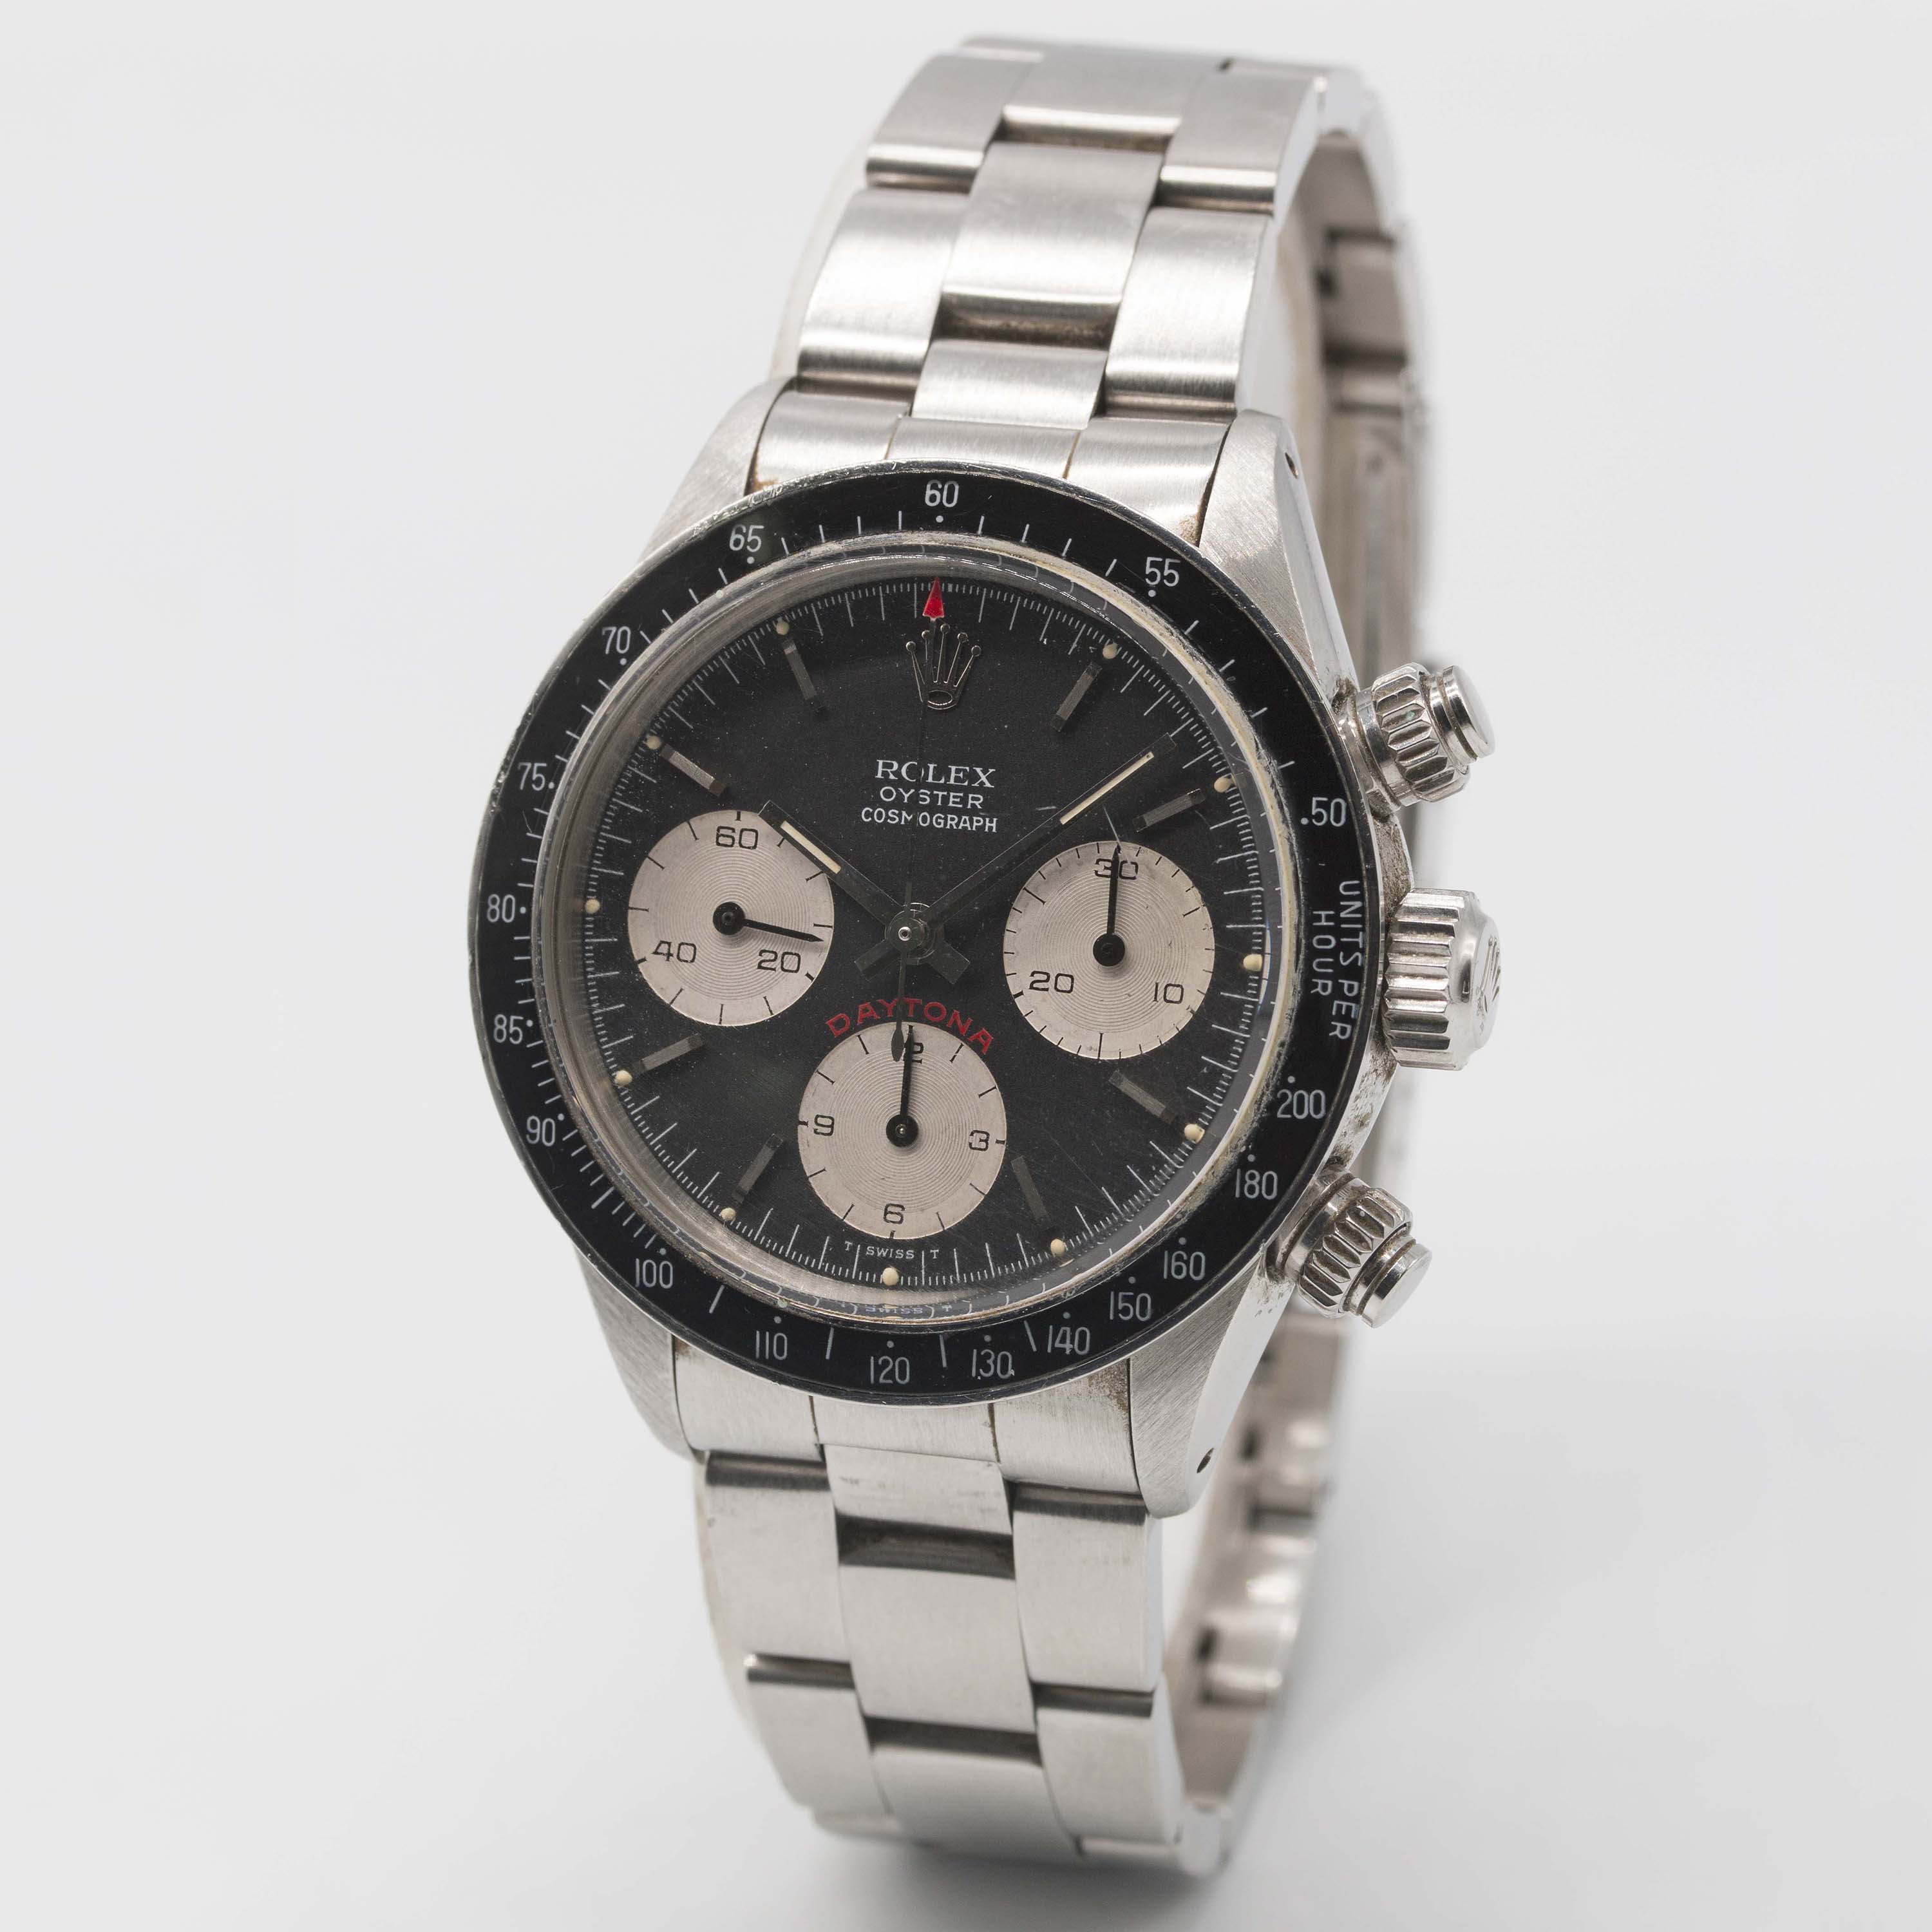 A VERY RARE GENTLEMAN'S STAINLESS STEEL ROLEX OYSTER COSMOGRAPH DAYTONA BRACELET WATCH CIRCA 1979, - Image 5 of 12